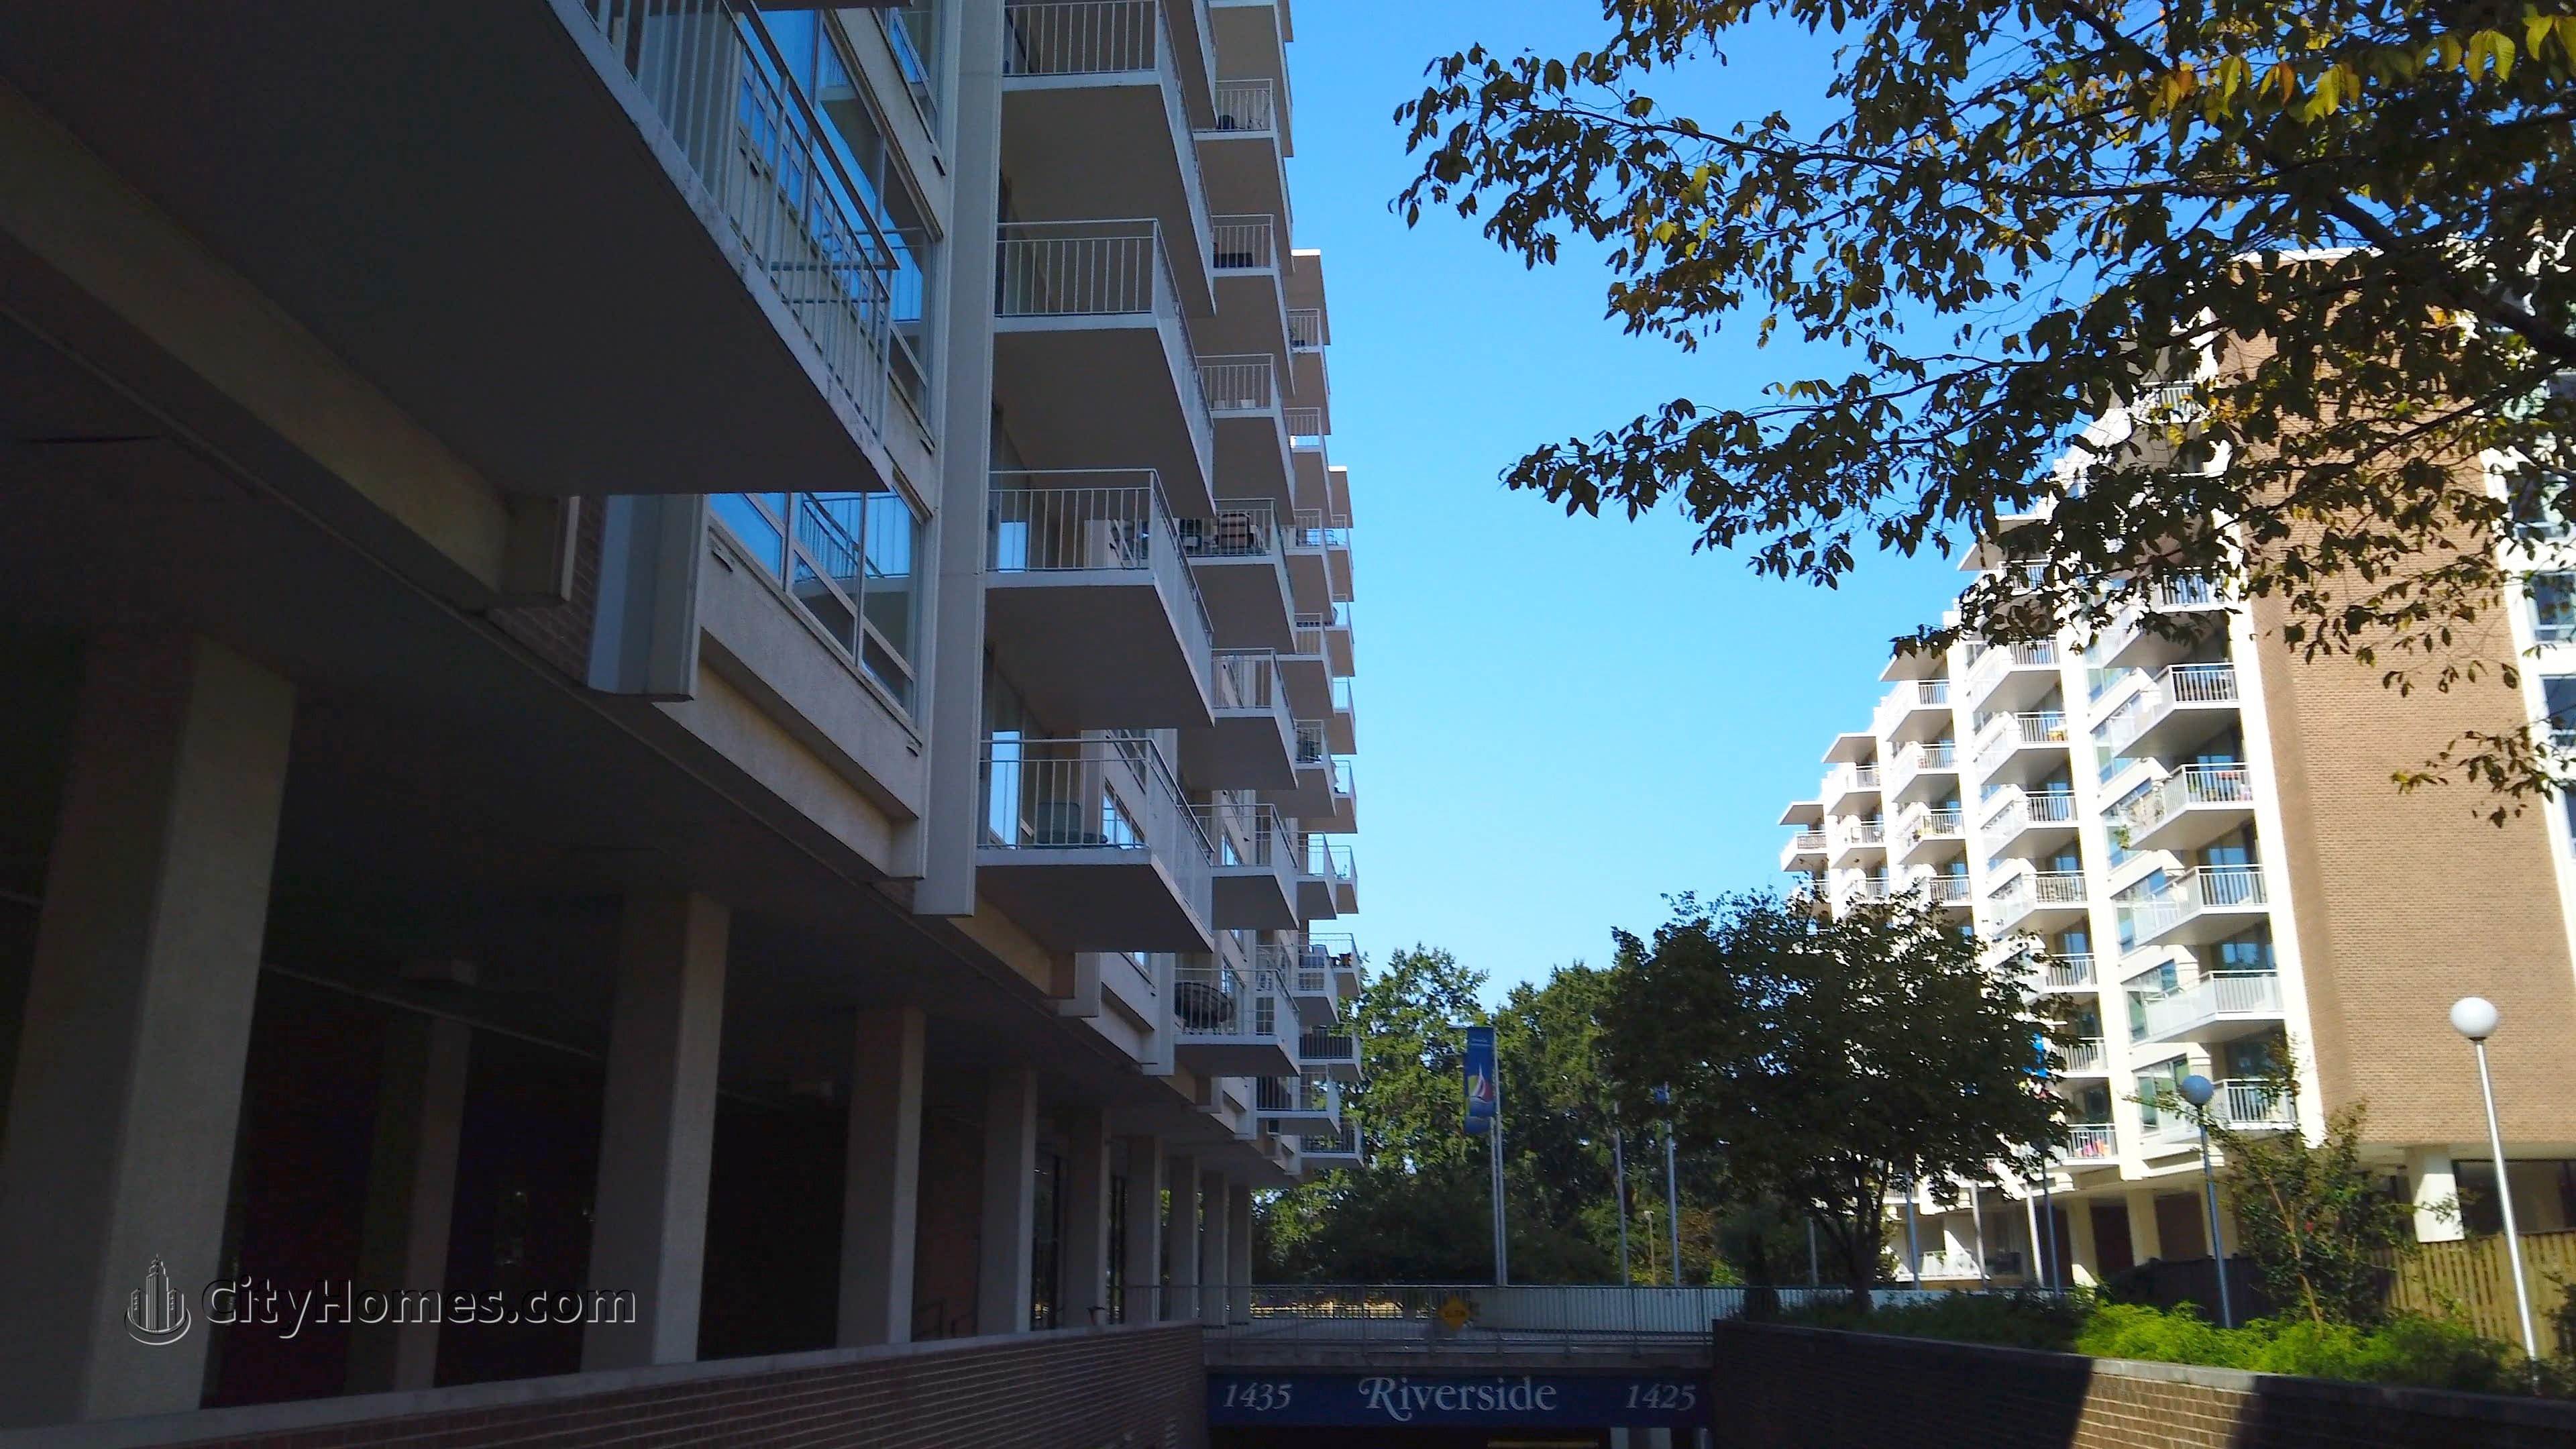 8. Riverside Condominiums building at 1425 & 1435 4th St NW, Southwest / Waterfront, Washington, DC 20024